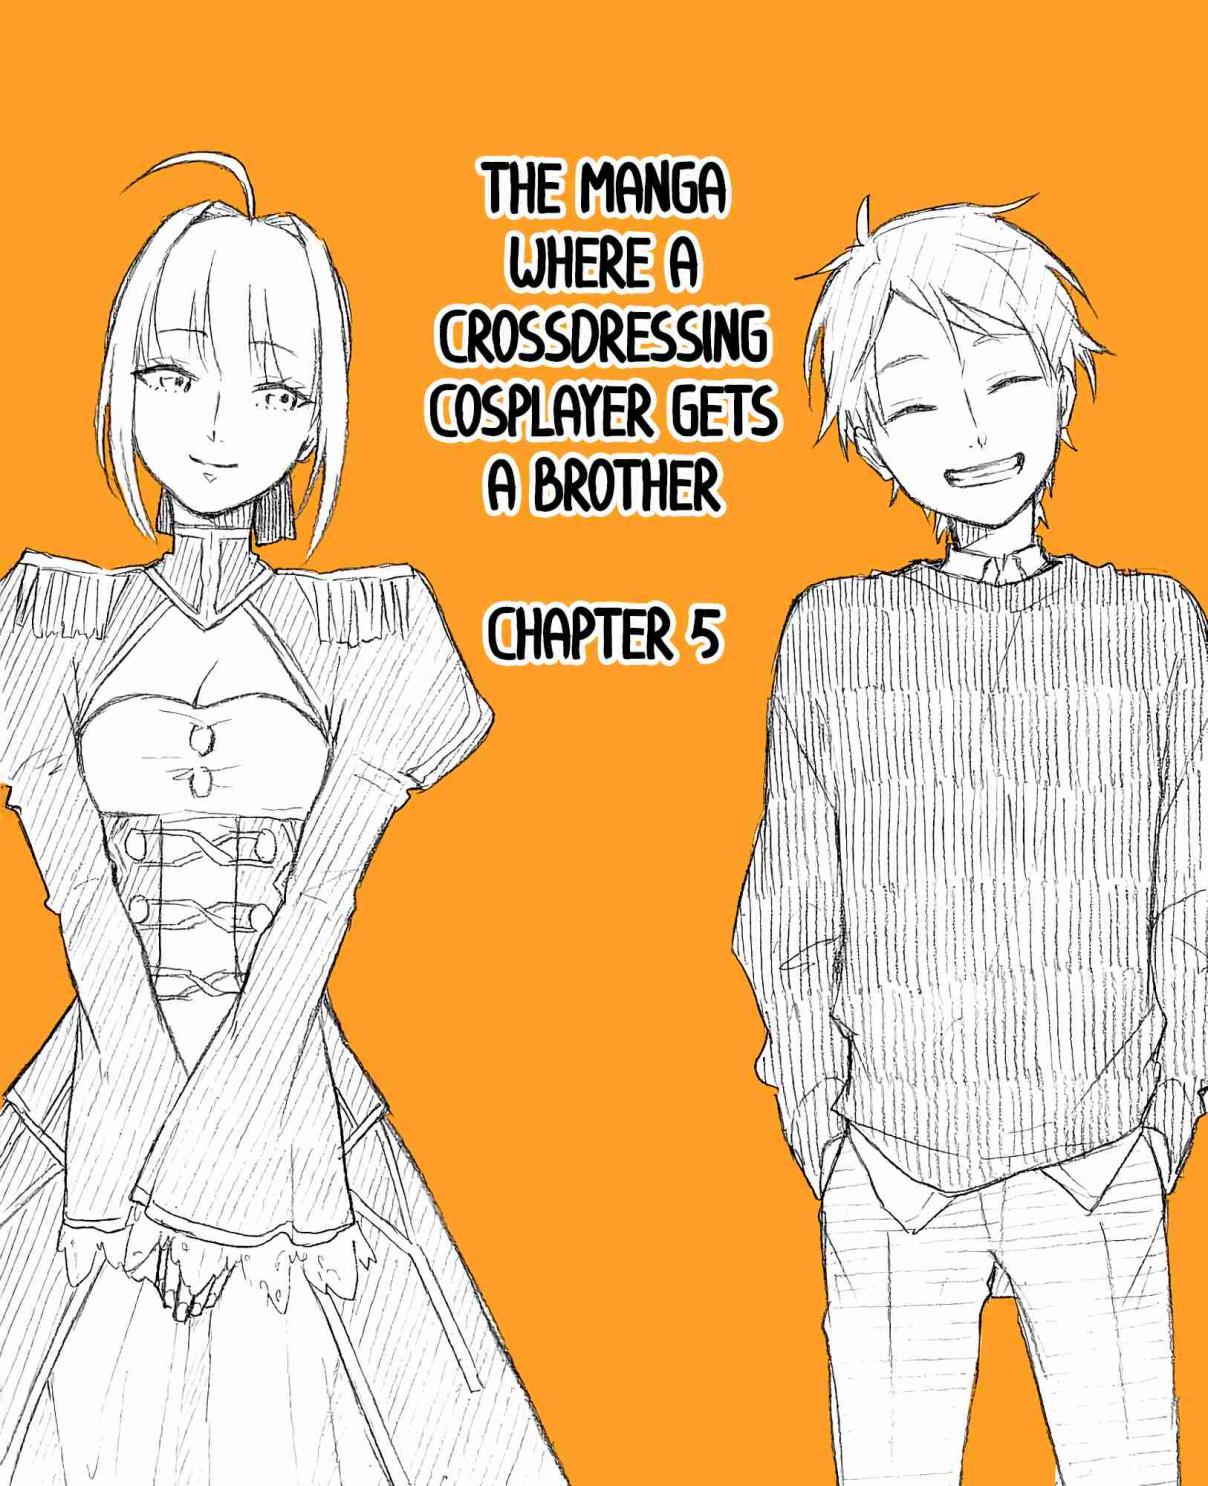 A Crossdressing Cosplayer Gets a Brother Ch. 5.1 Part 13